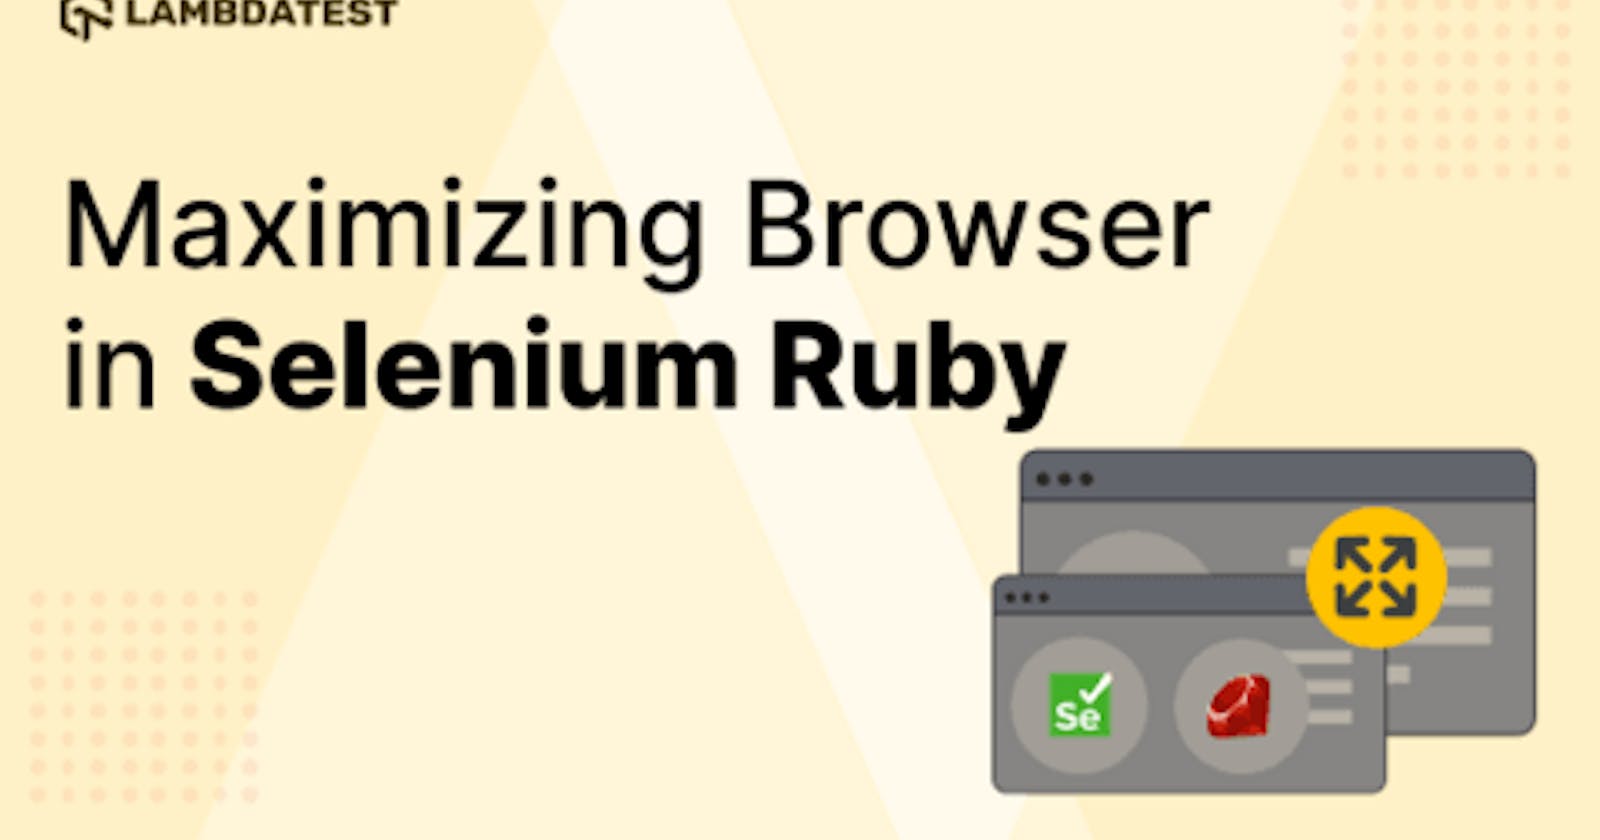 How To Maximize Browser In Selenium Ruby